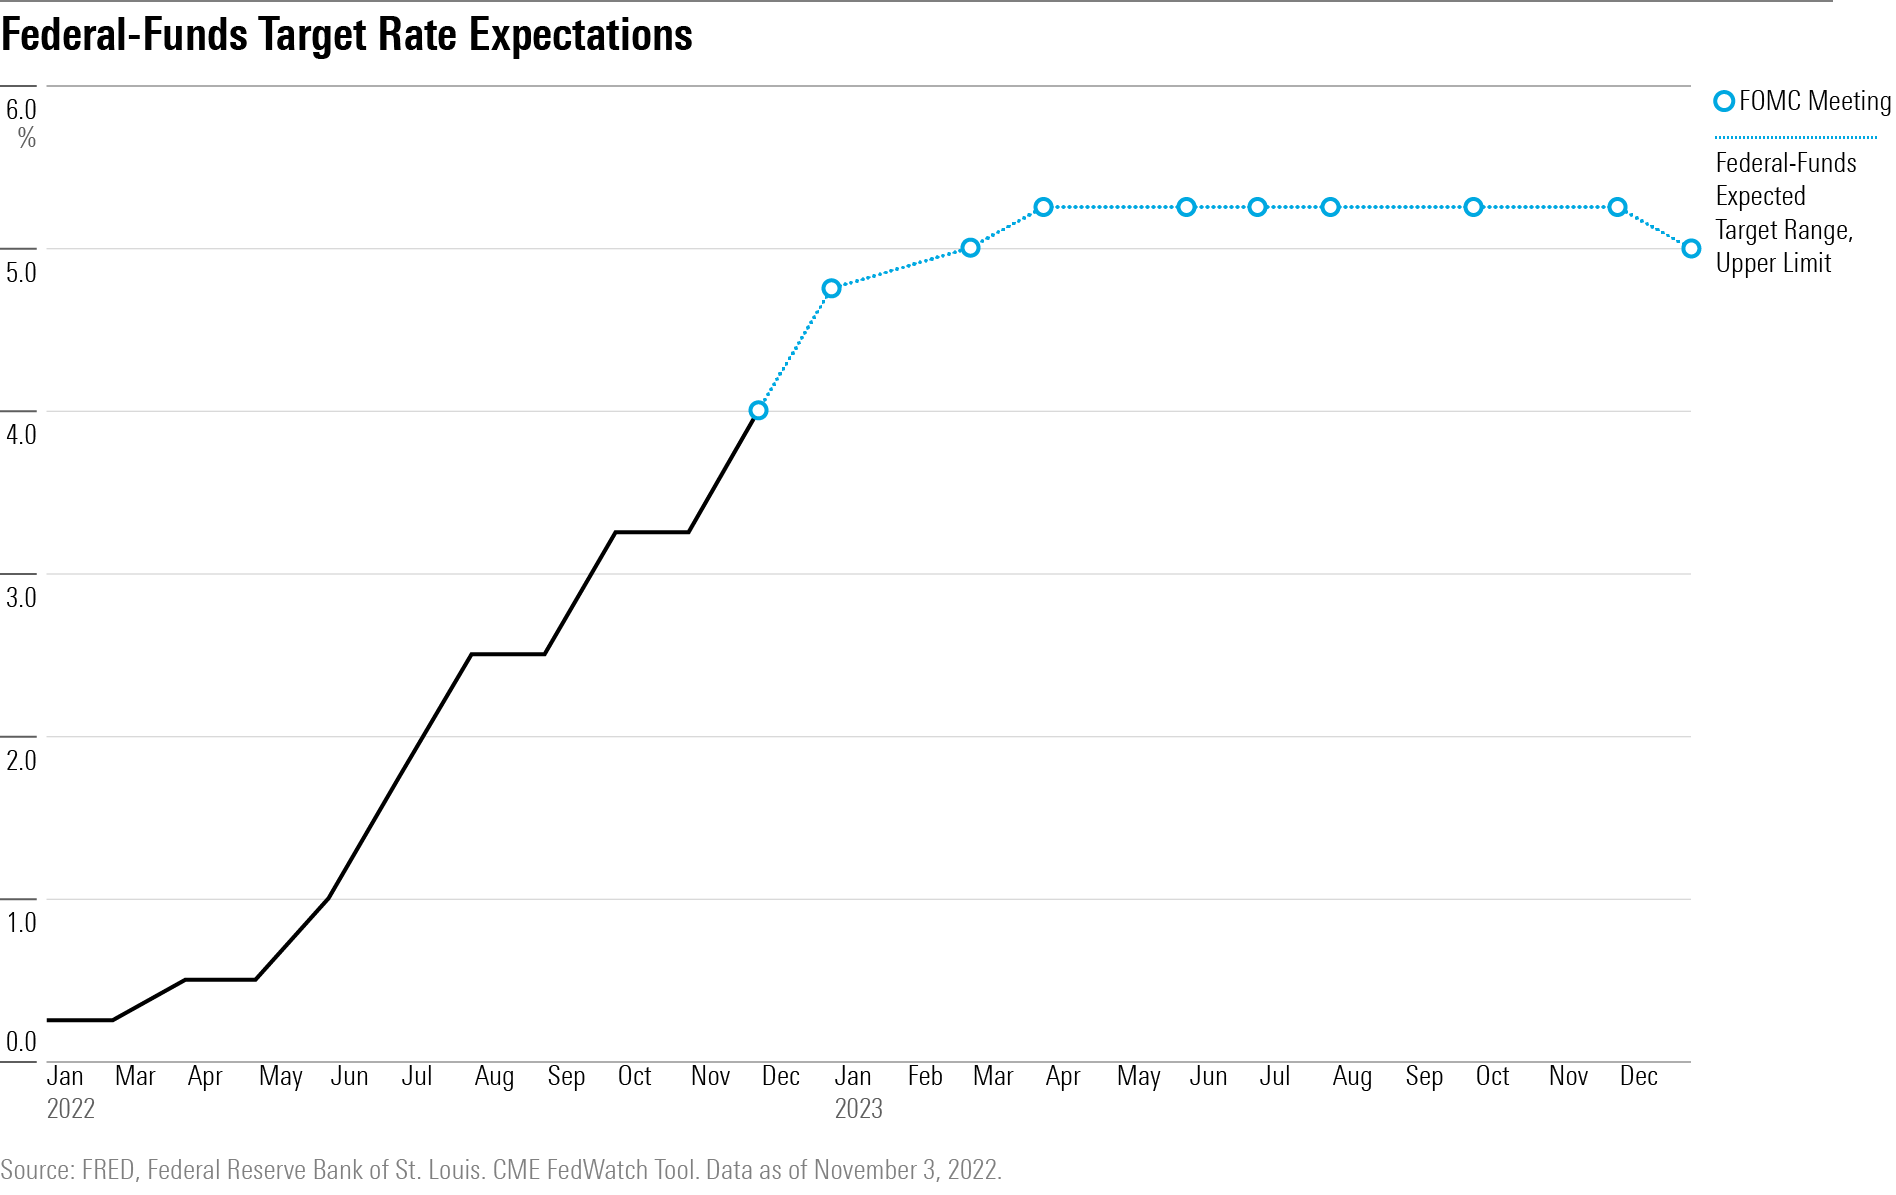 Line chart showing Federal-funds rate target expectations